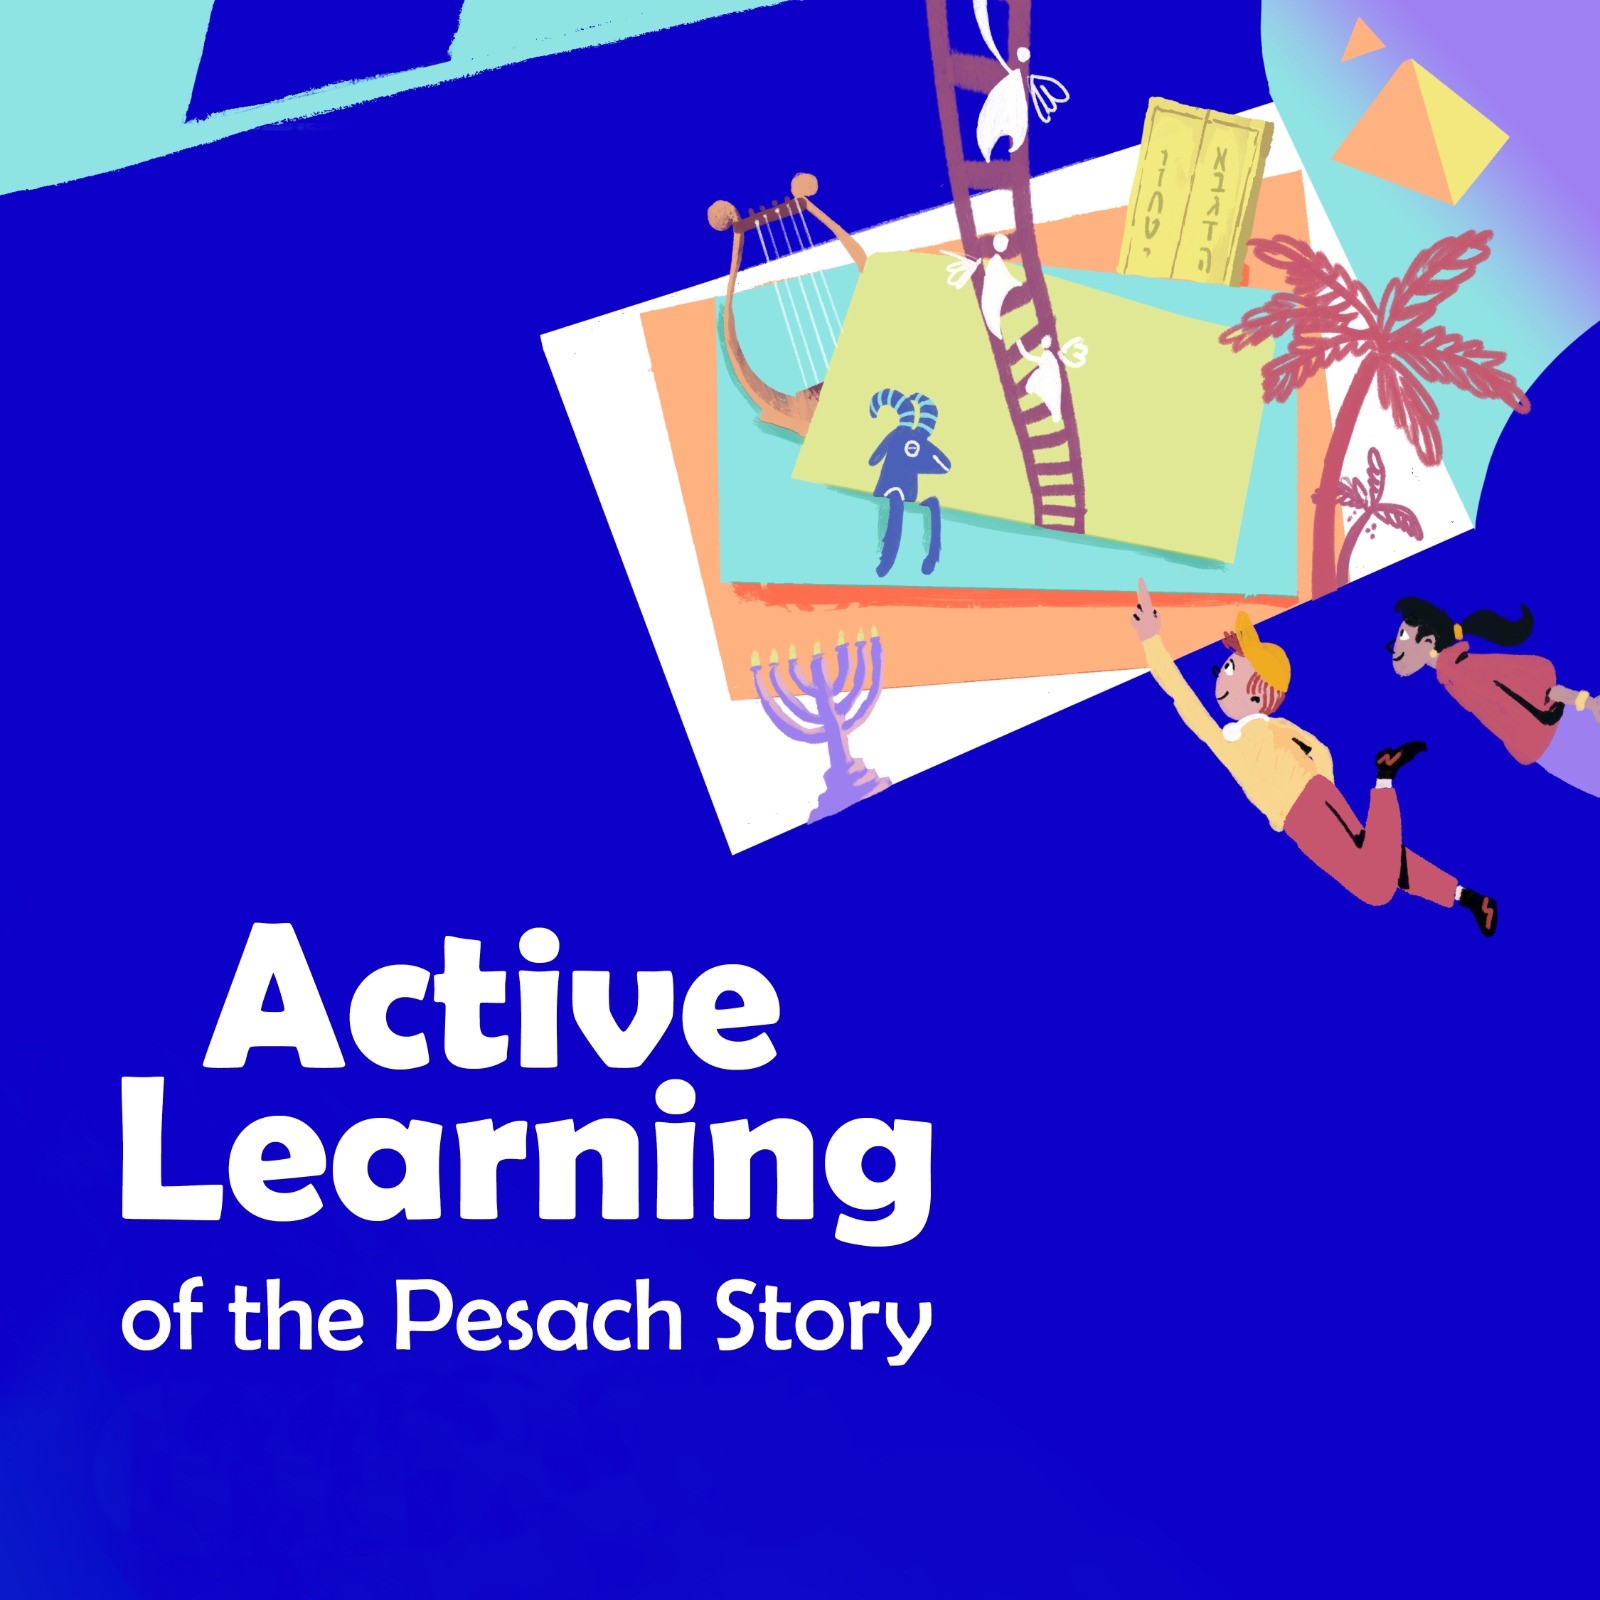 Active Learning of the Pesach Story